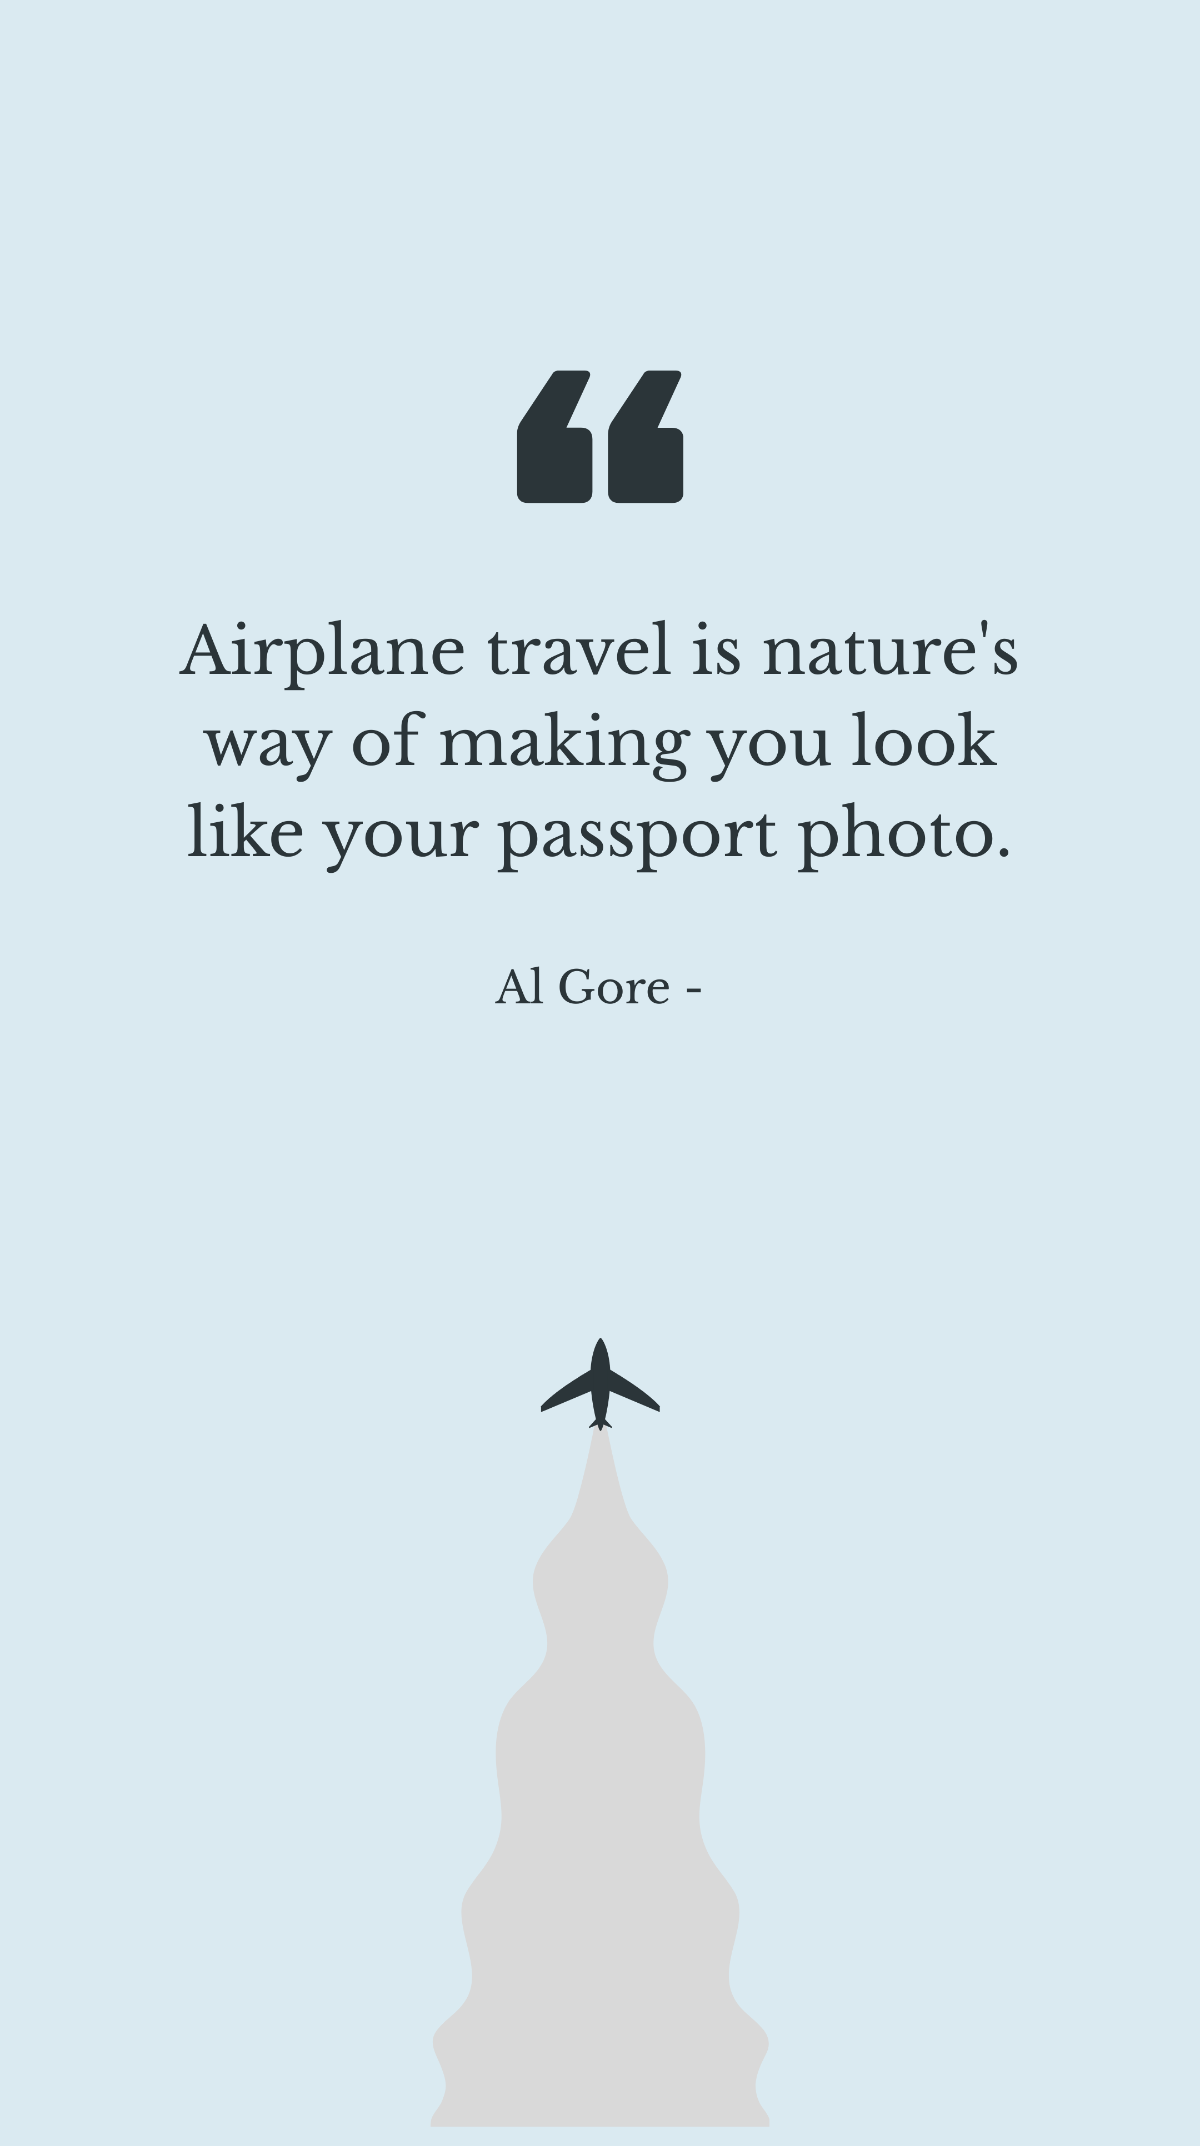 Al Gore - Airplane travel is nature's way of making you look like your passport photo. Template